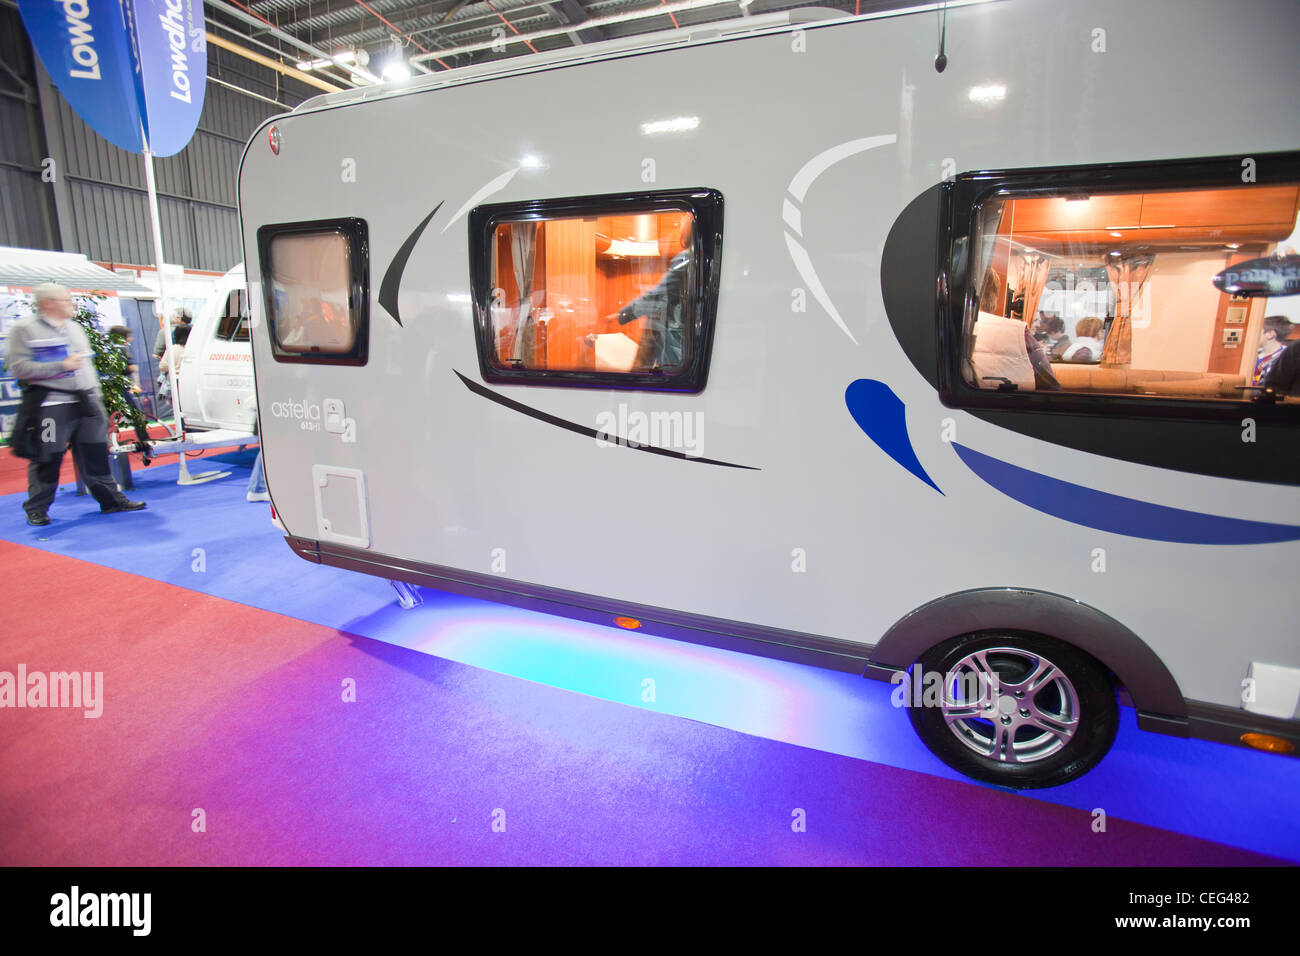 A caravan at the Caravan and motor home show at Event City in Manchester, UK. Stock Photo